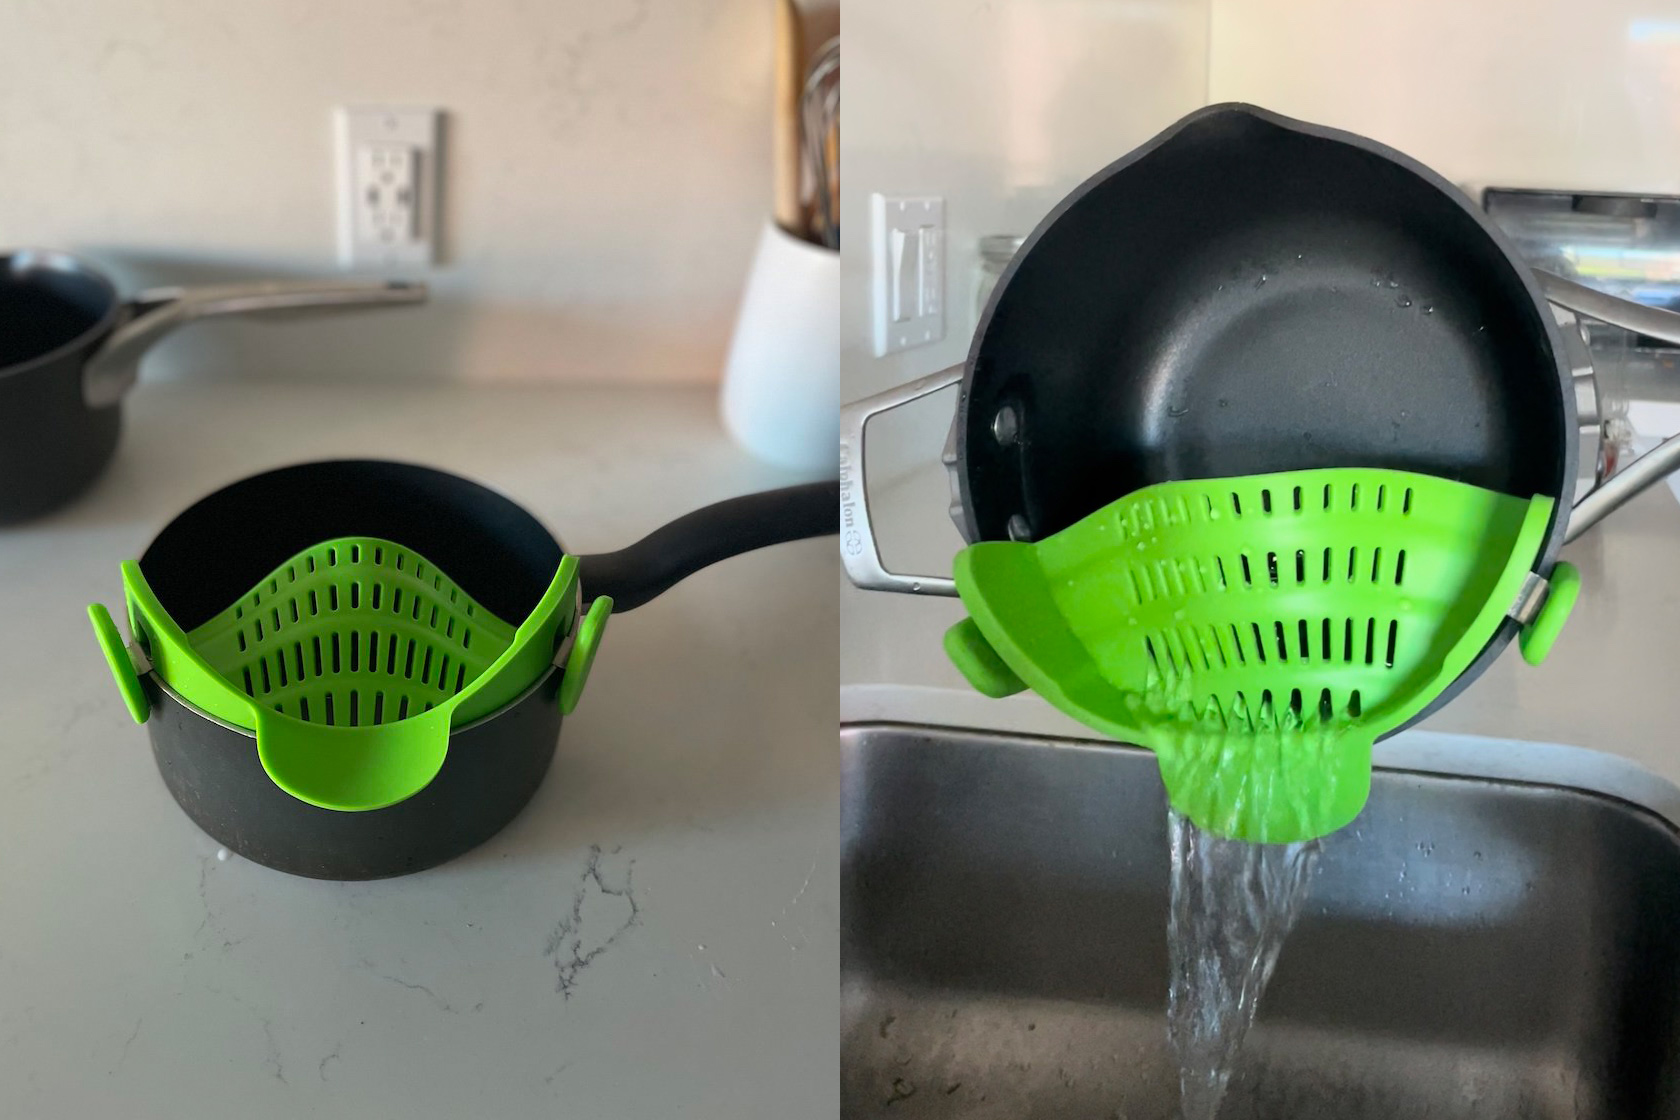 Kitchen Gizmo review: This $14 strainer makes meal time so much easier